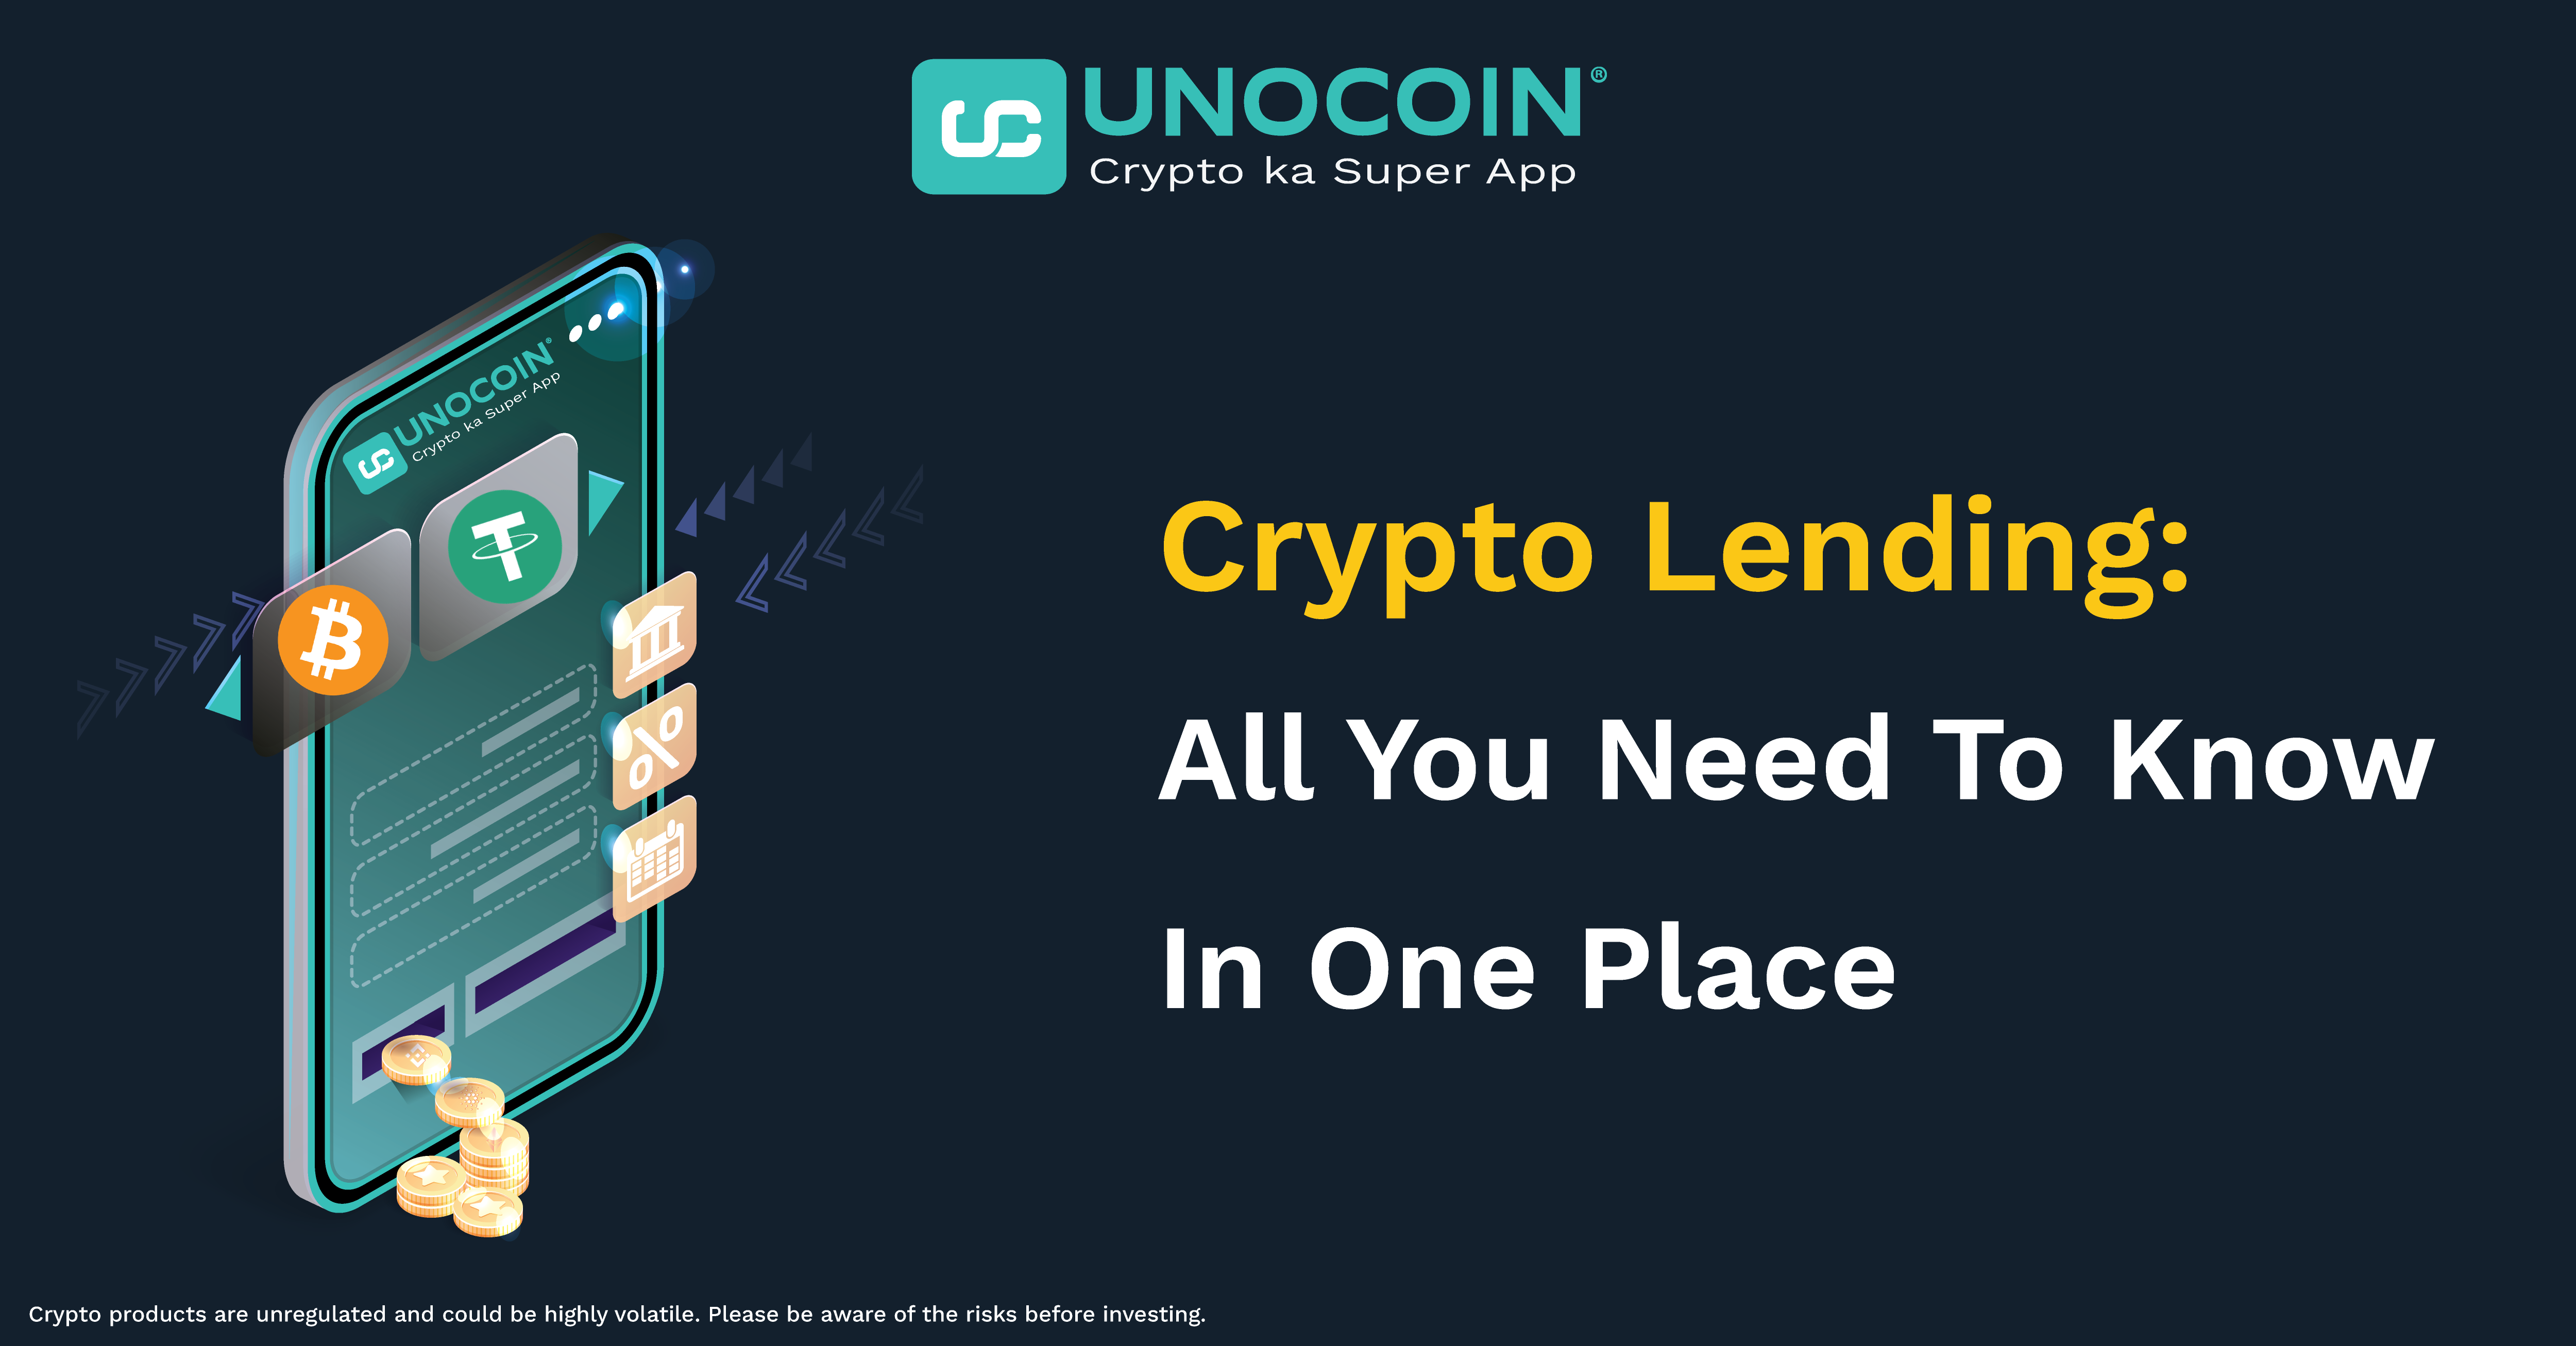 lending cryptocurrency meaning